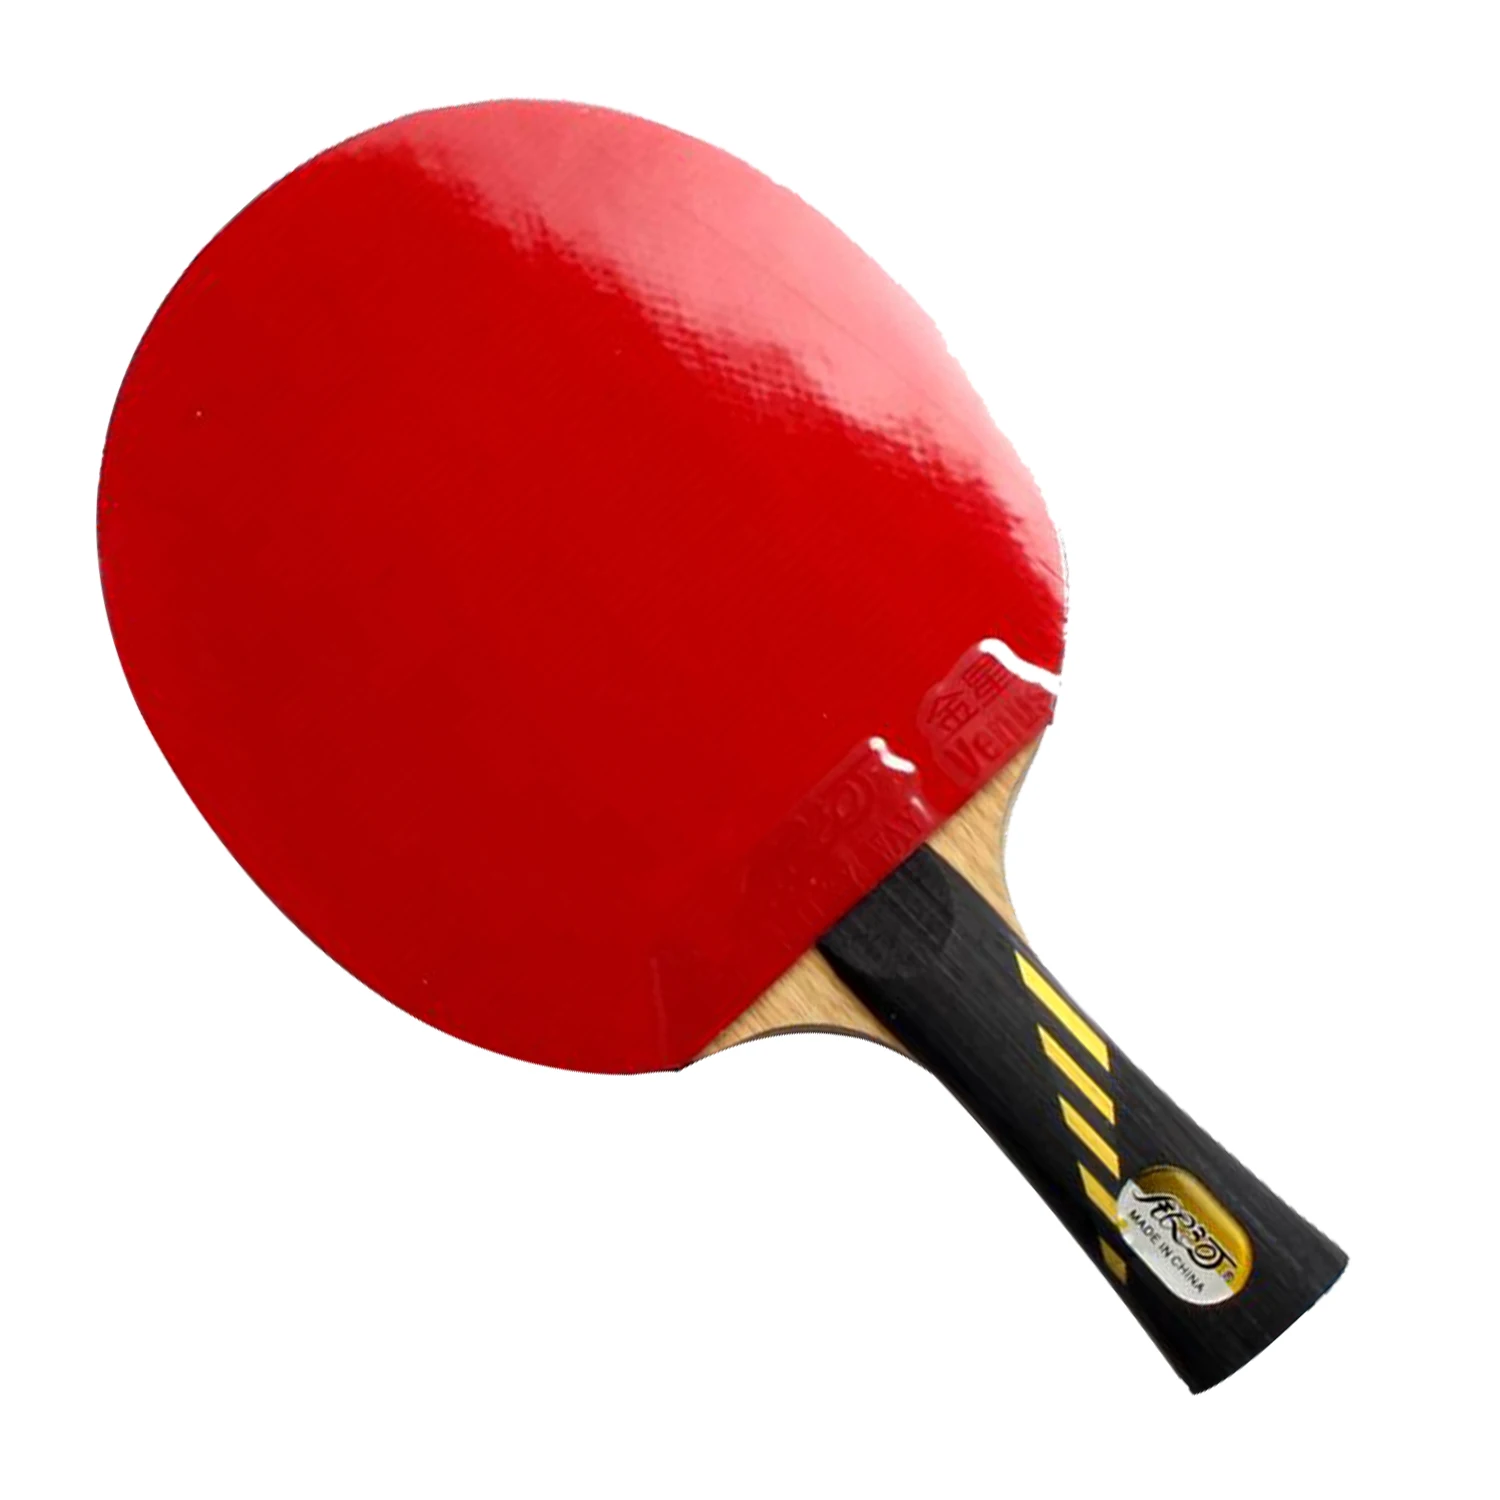 

Original yinhe 09b 09d finished racket carbon racket good in elastic and speed fast attack with loop ping pong racket